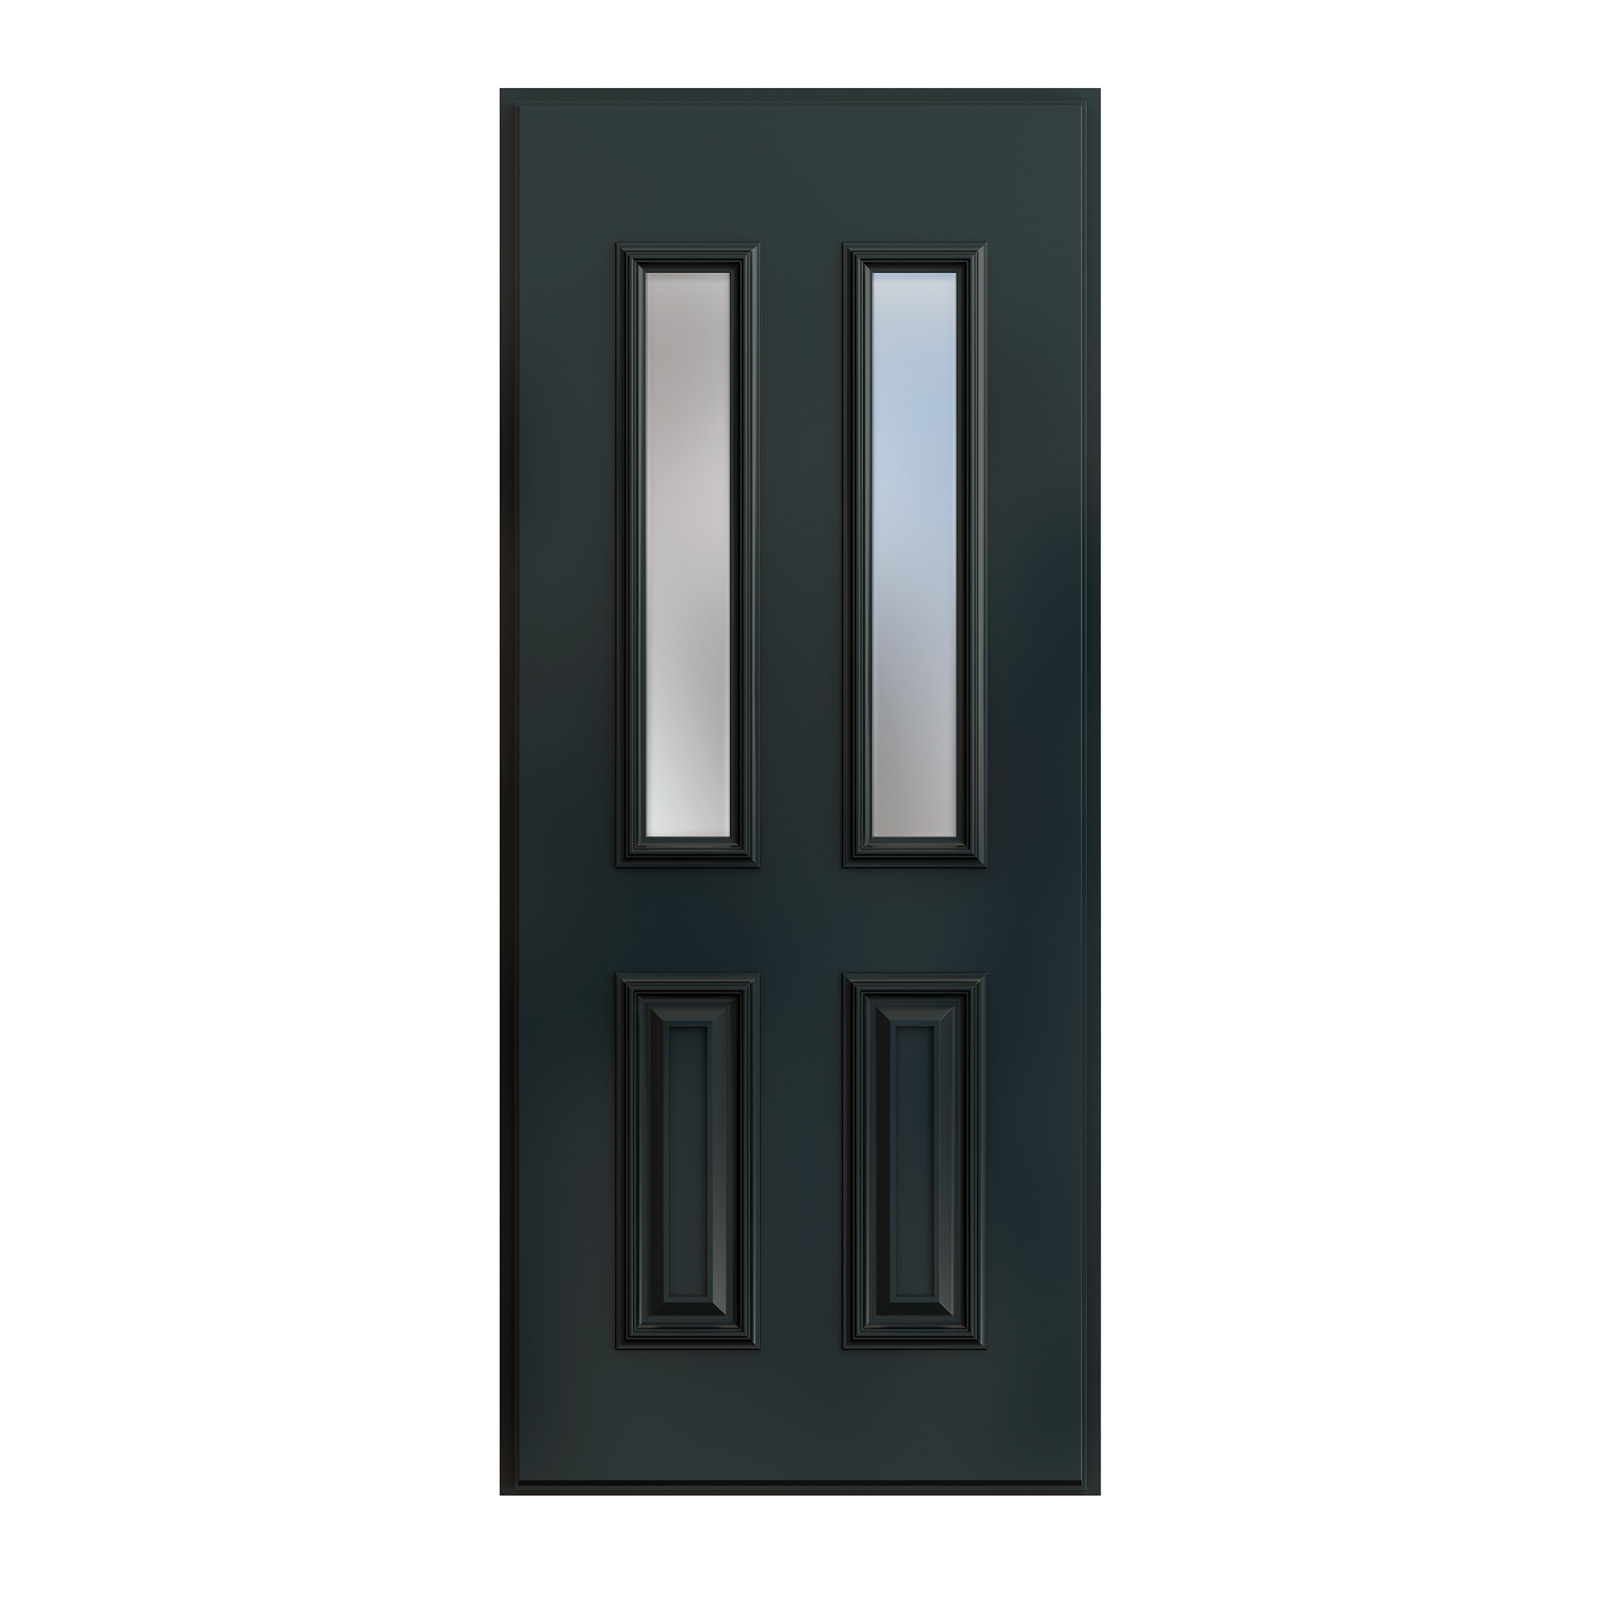 Alitherm 400 Door with PT0006P panel